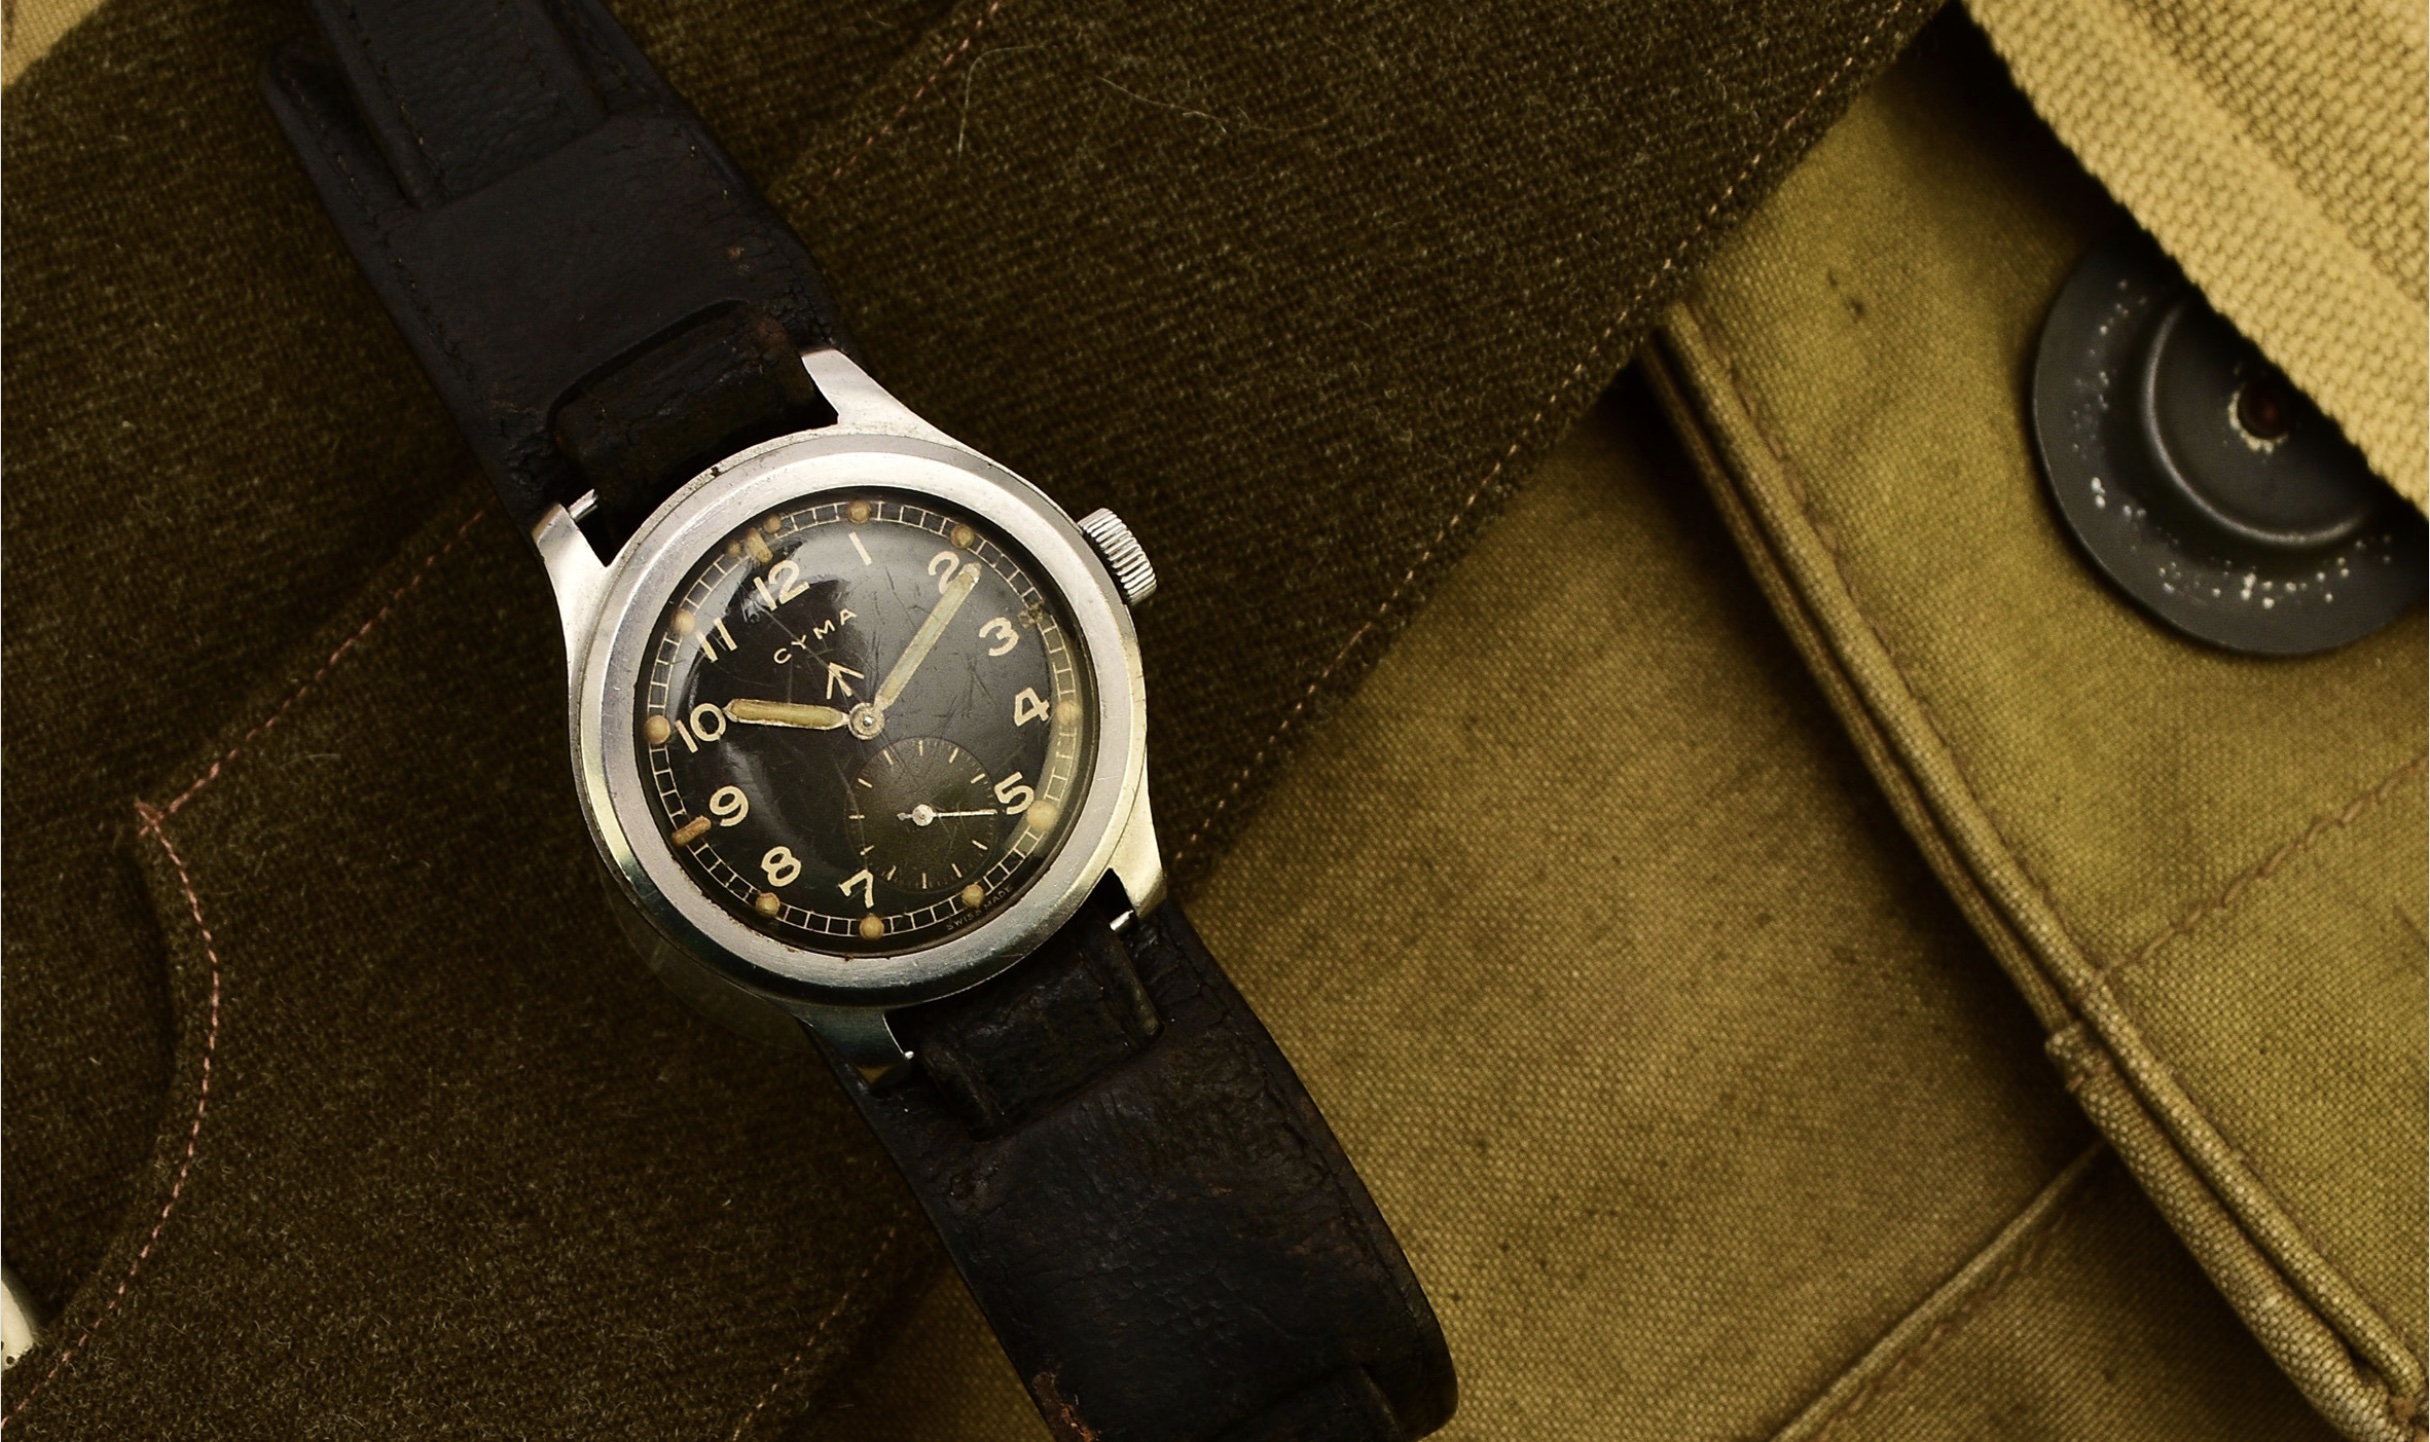 Cyma wristwatch is one of the Dirty Dozen – Antique Collecting